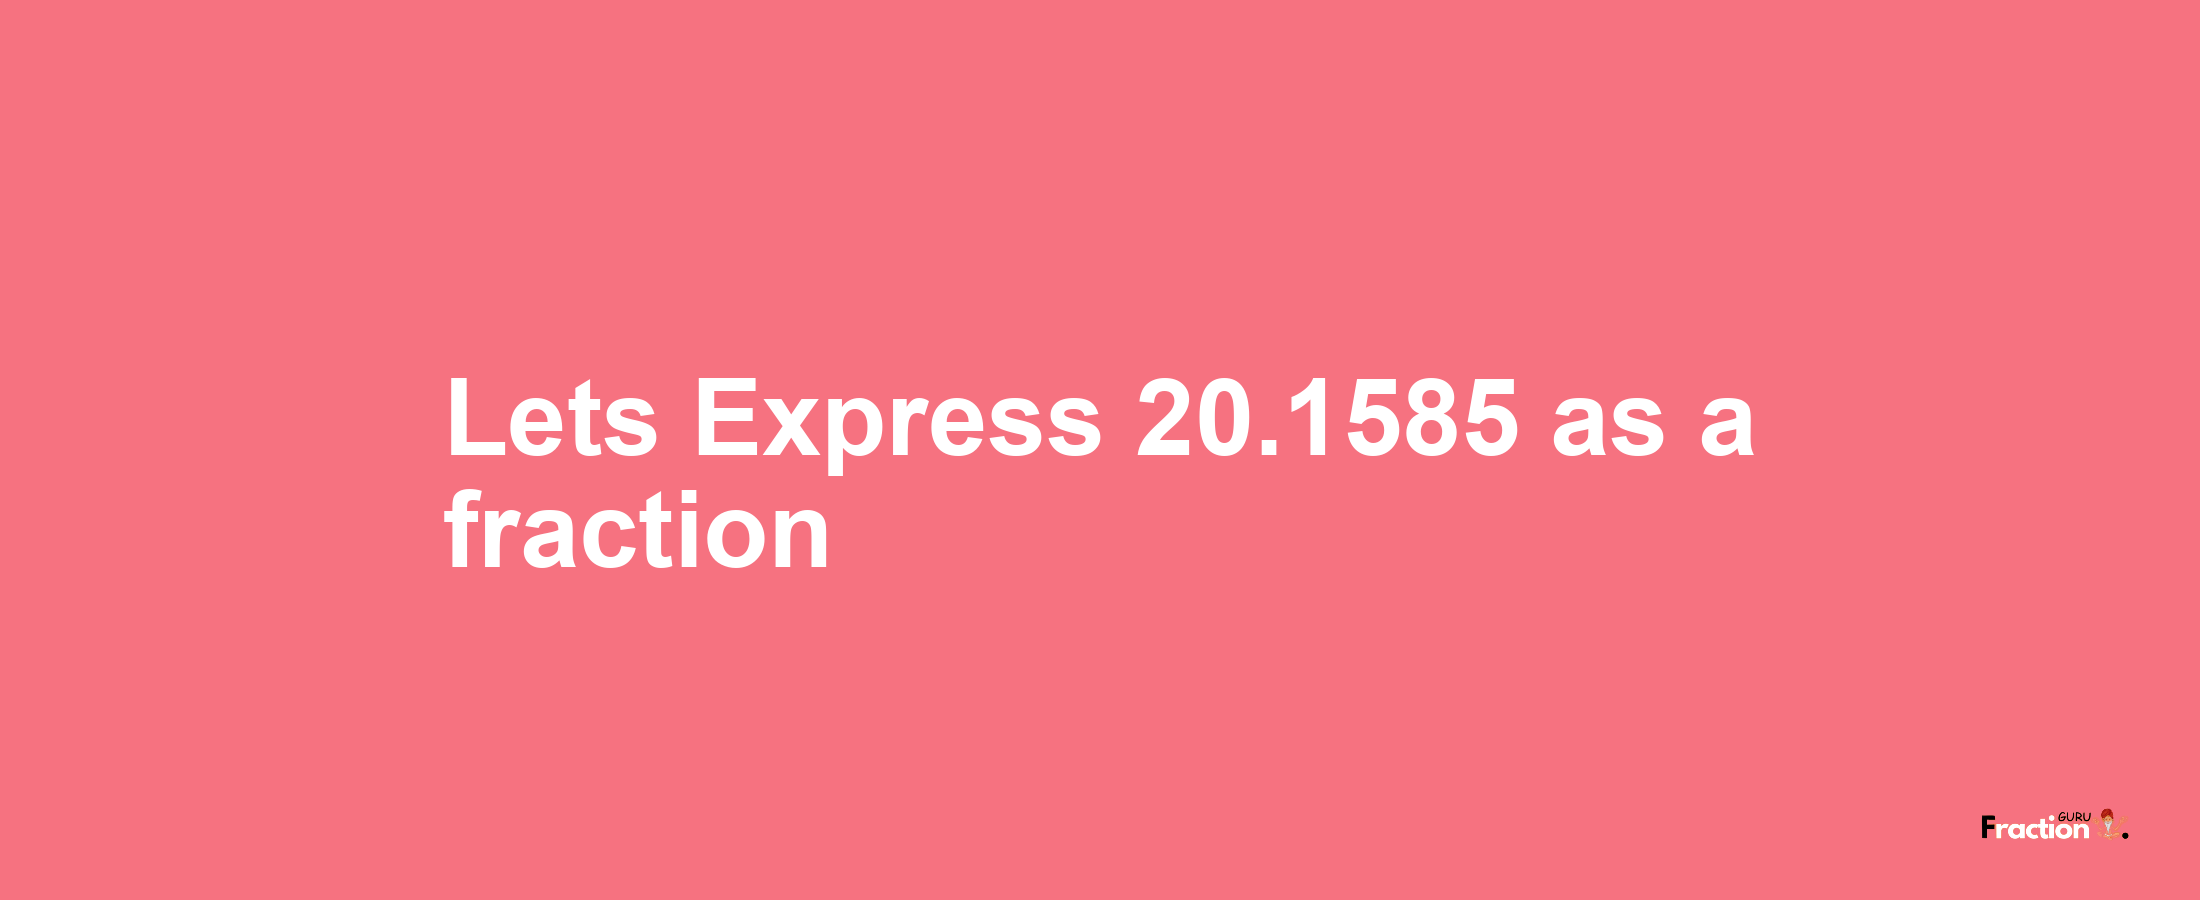 Lets Express 20.1585 as afraction